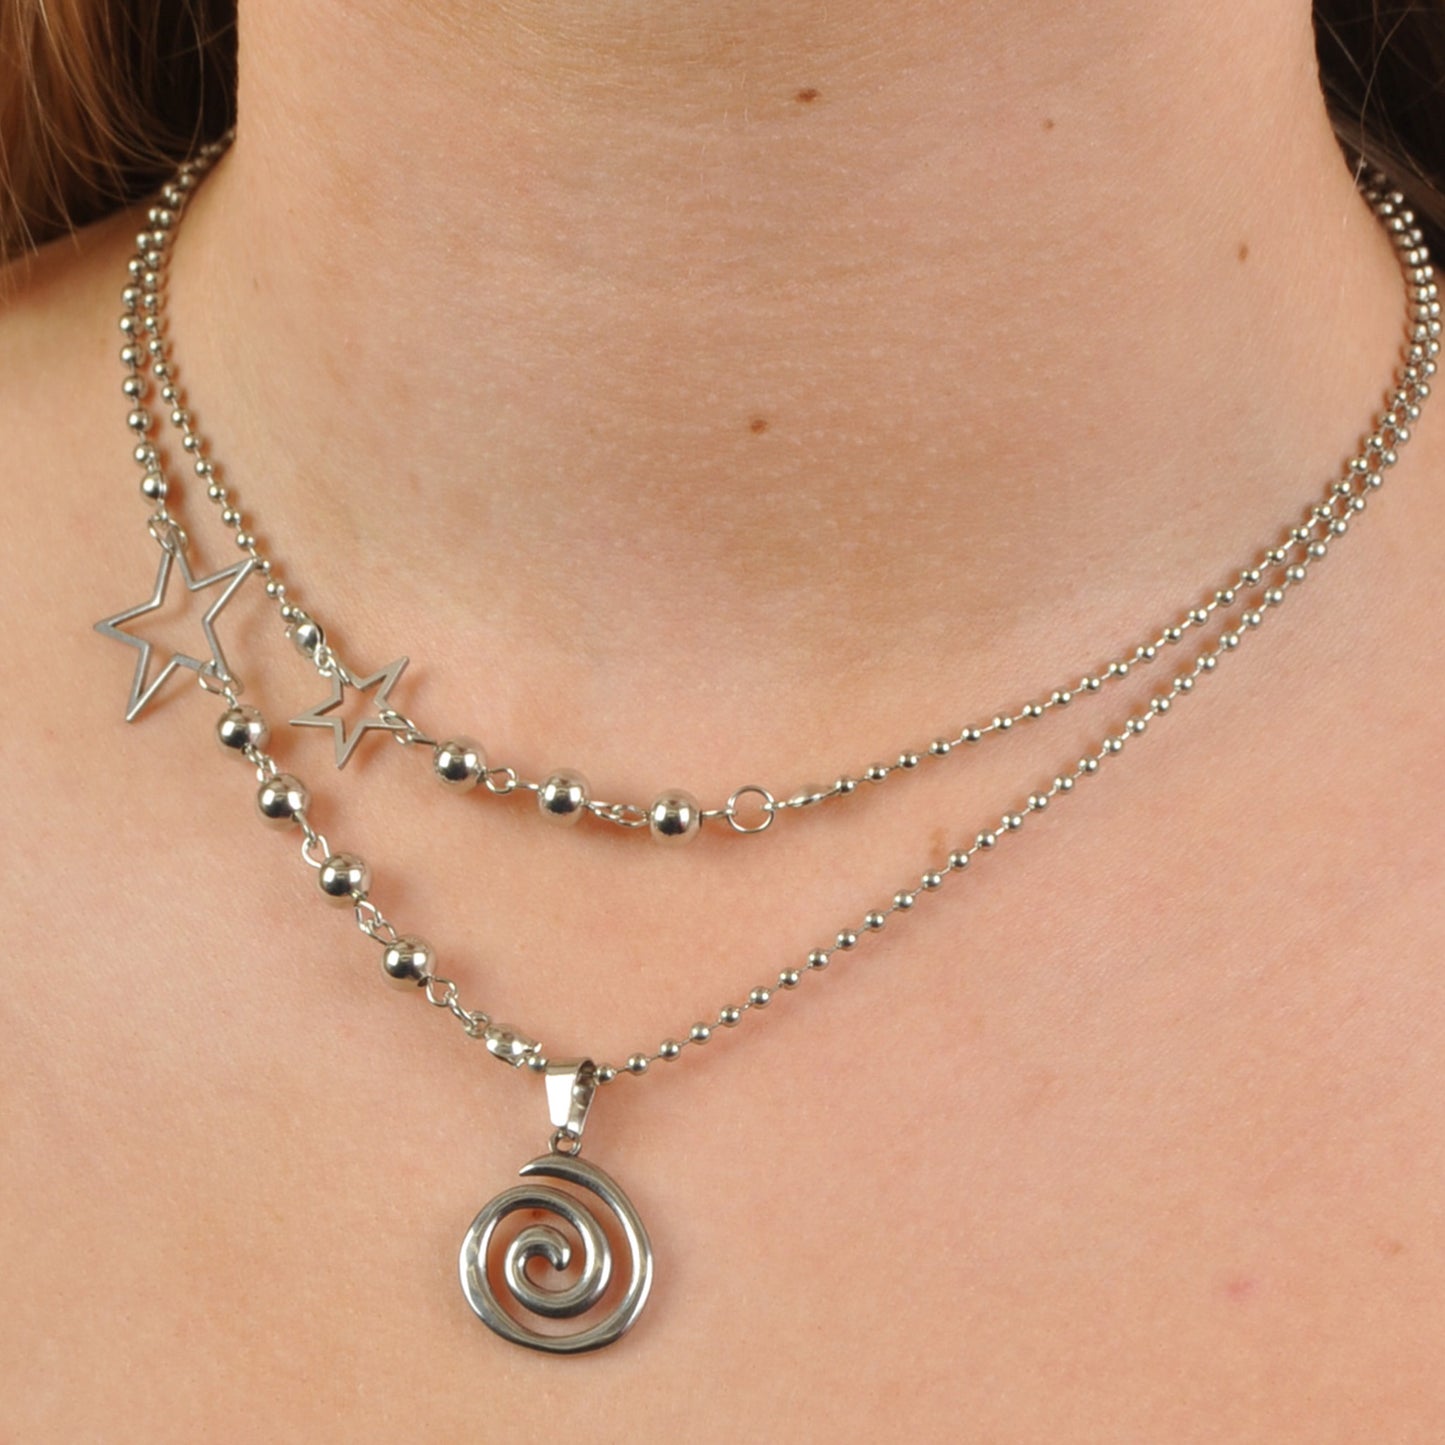 Charm Necklace Spiral and Star Layered Ball Chain